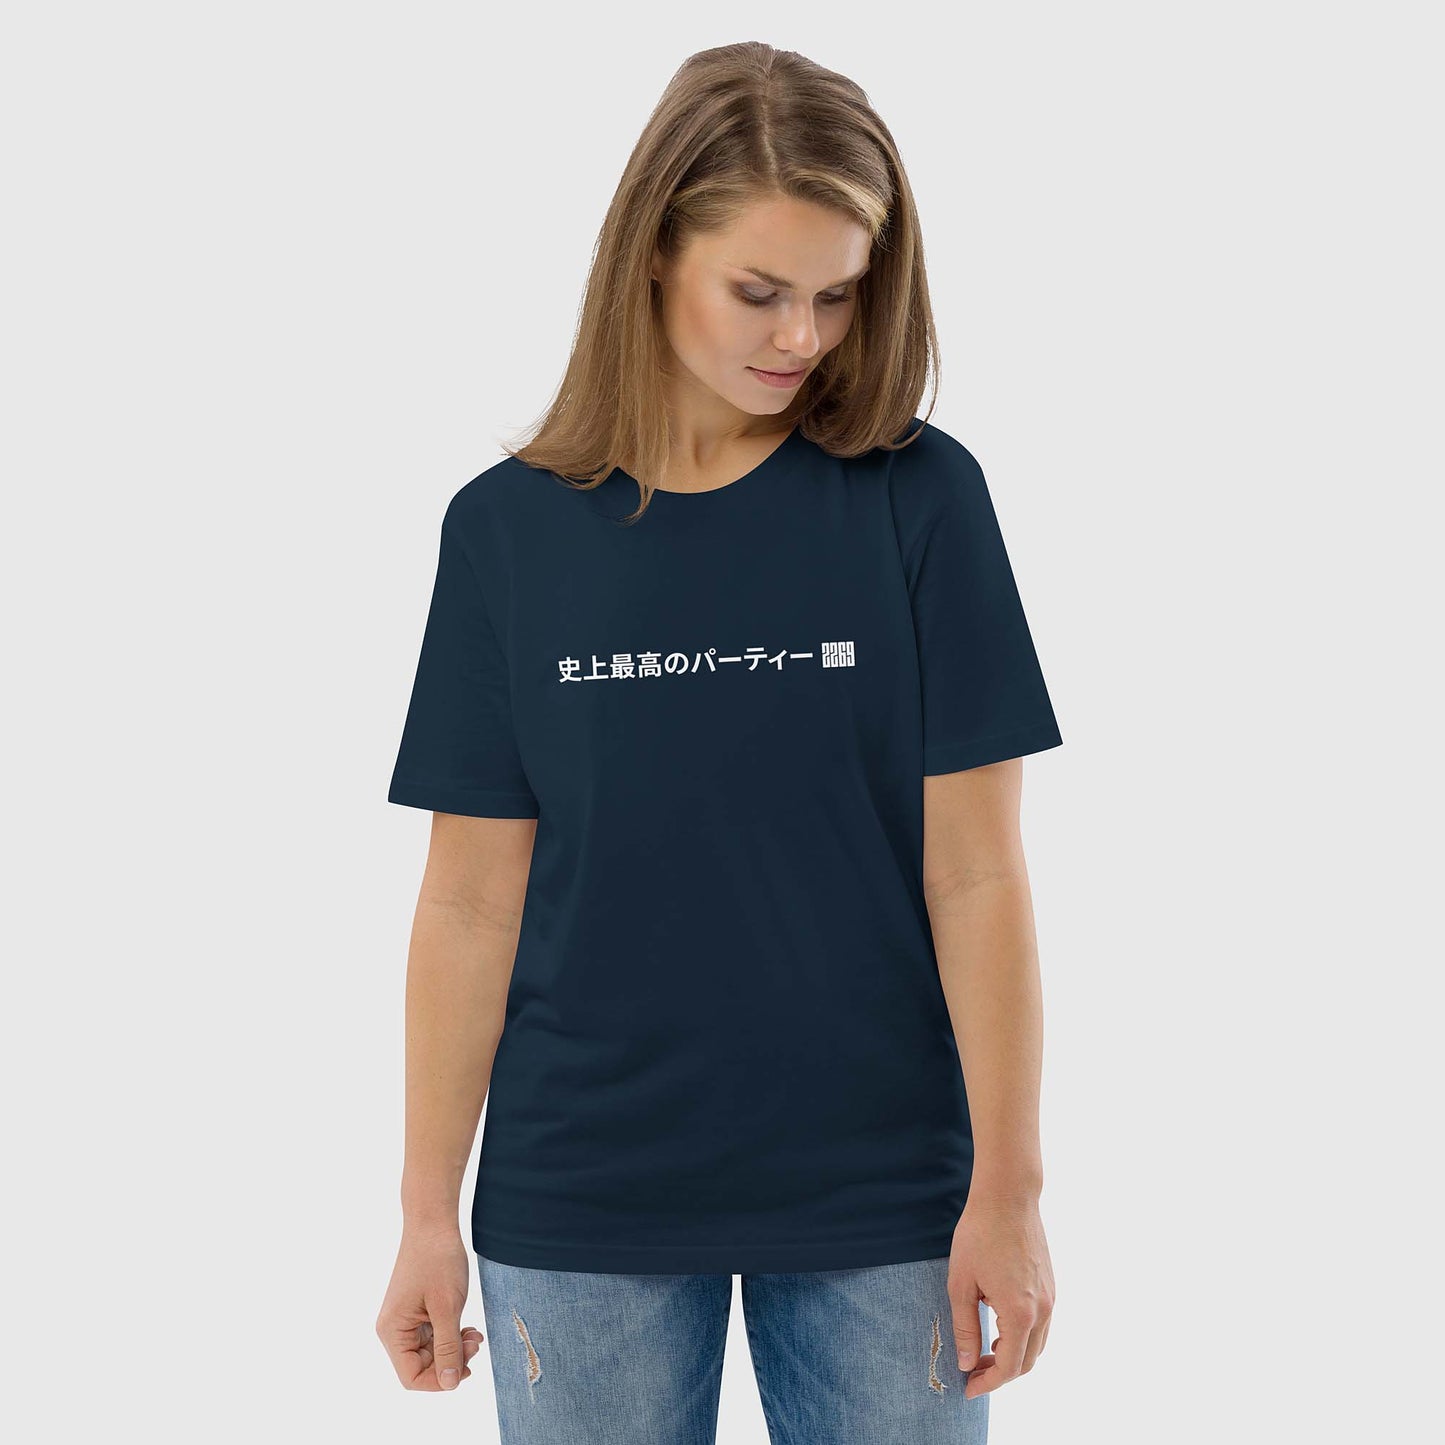 Unisex navy organic cotton t-shirt with Japanese 2269 party message